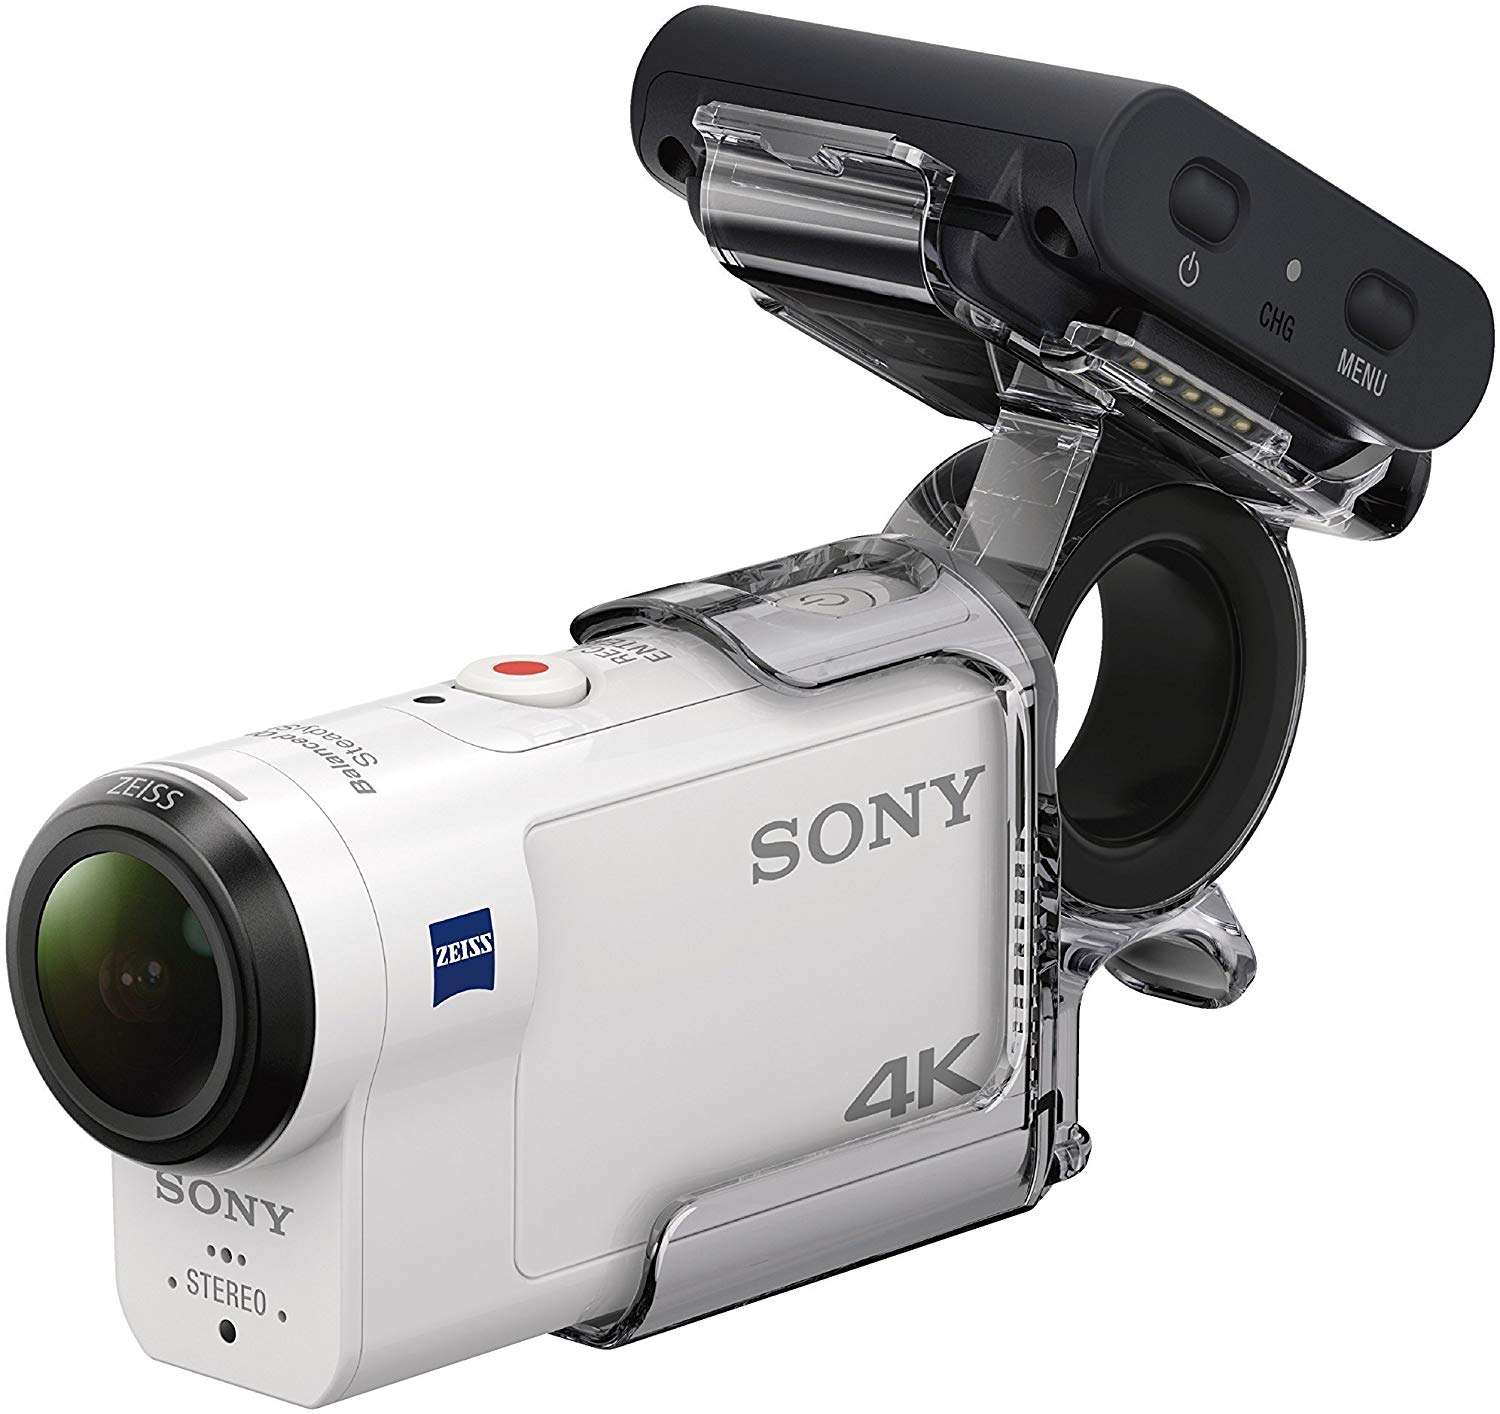 Fotocamere subacquee Sony Fdr-X3000